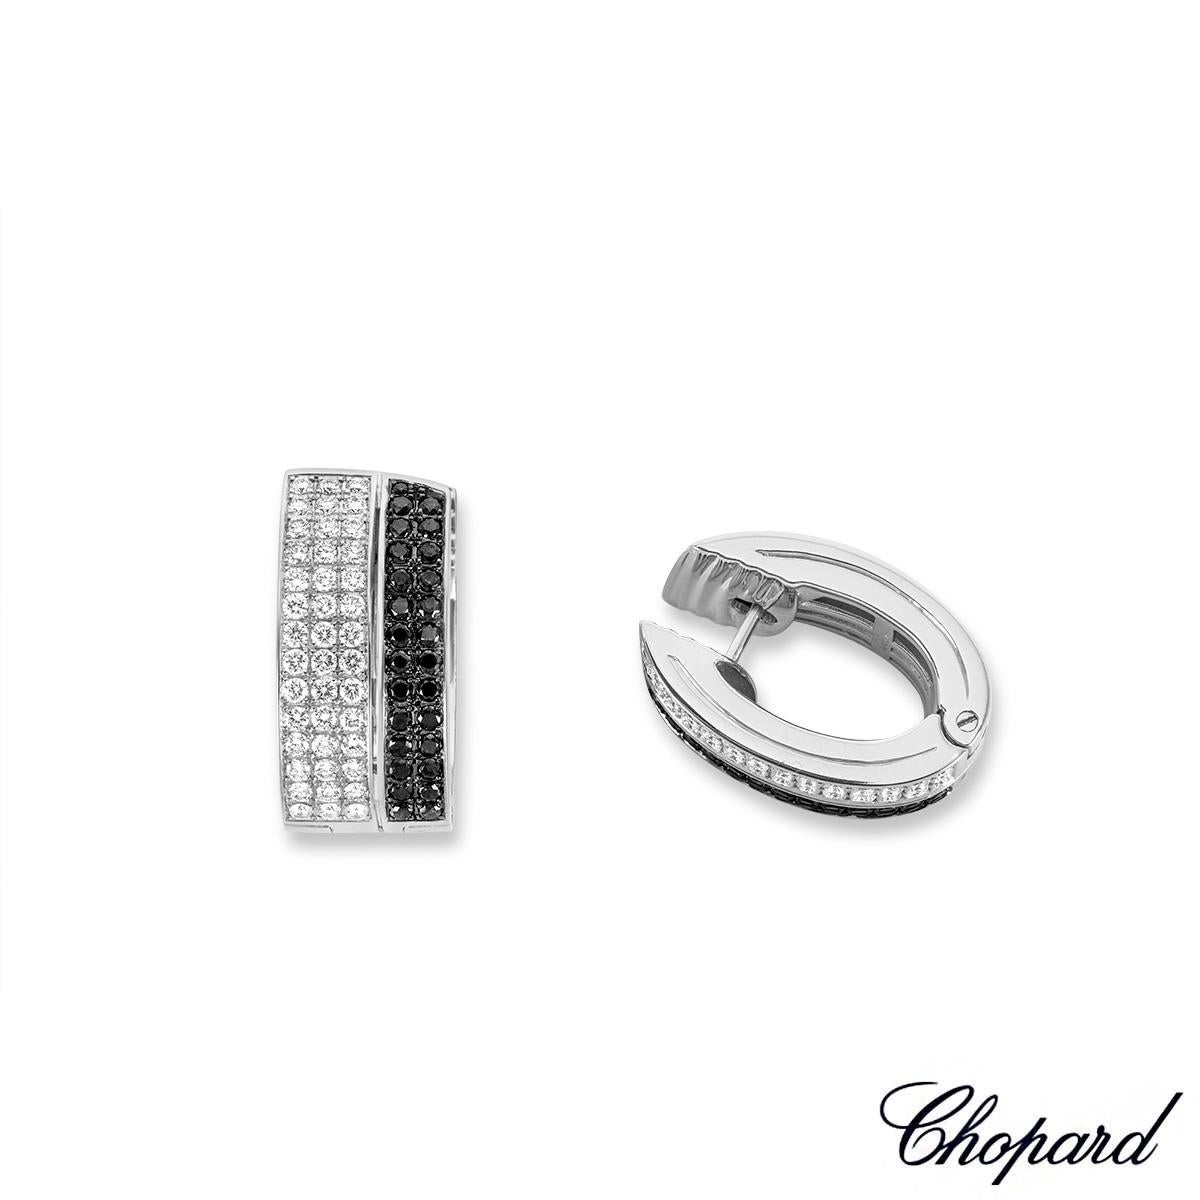 An elegant pair of 18k white gold diamond set oval earrings from Chopard. The earrings are set with a triple row of pave set with clear round brilliant cut diamonds in a horizontal design totalling 1.35ct, F-G colour and VS in clarity, complemented